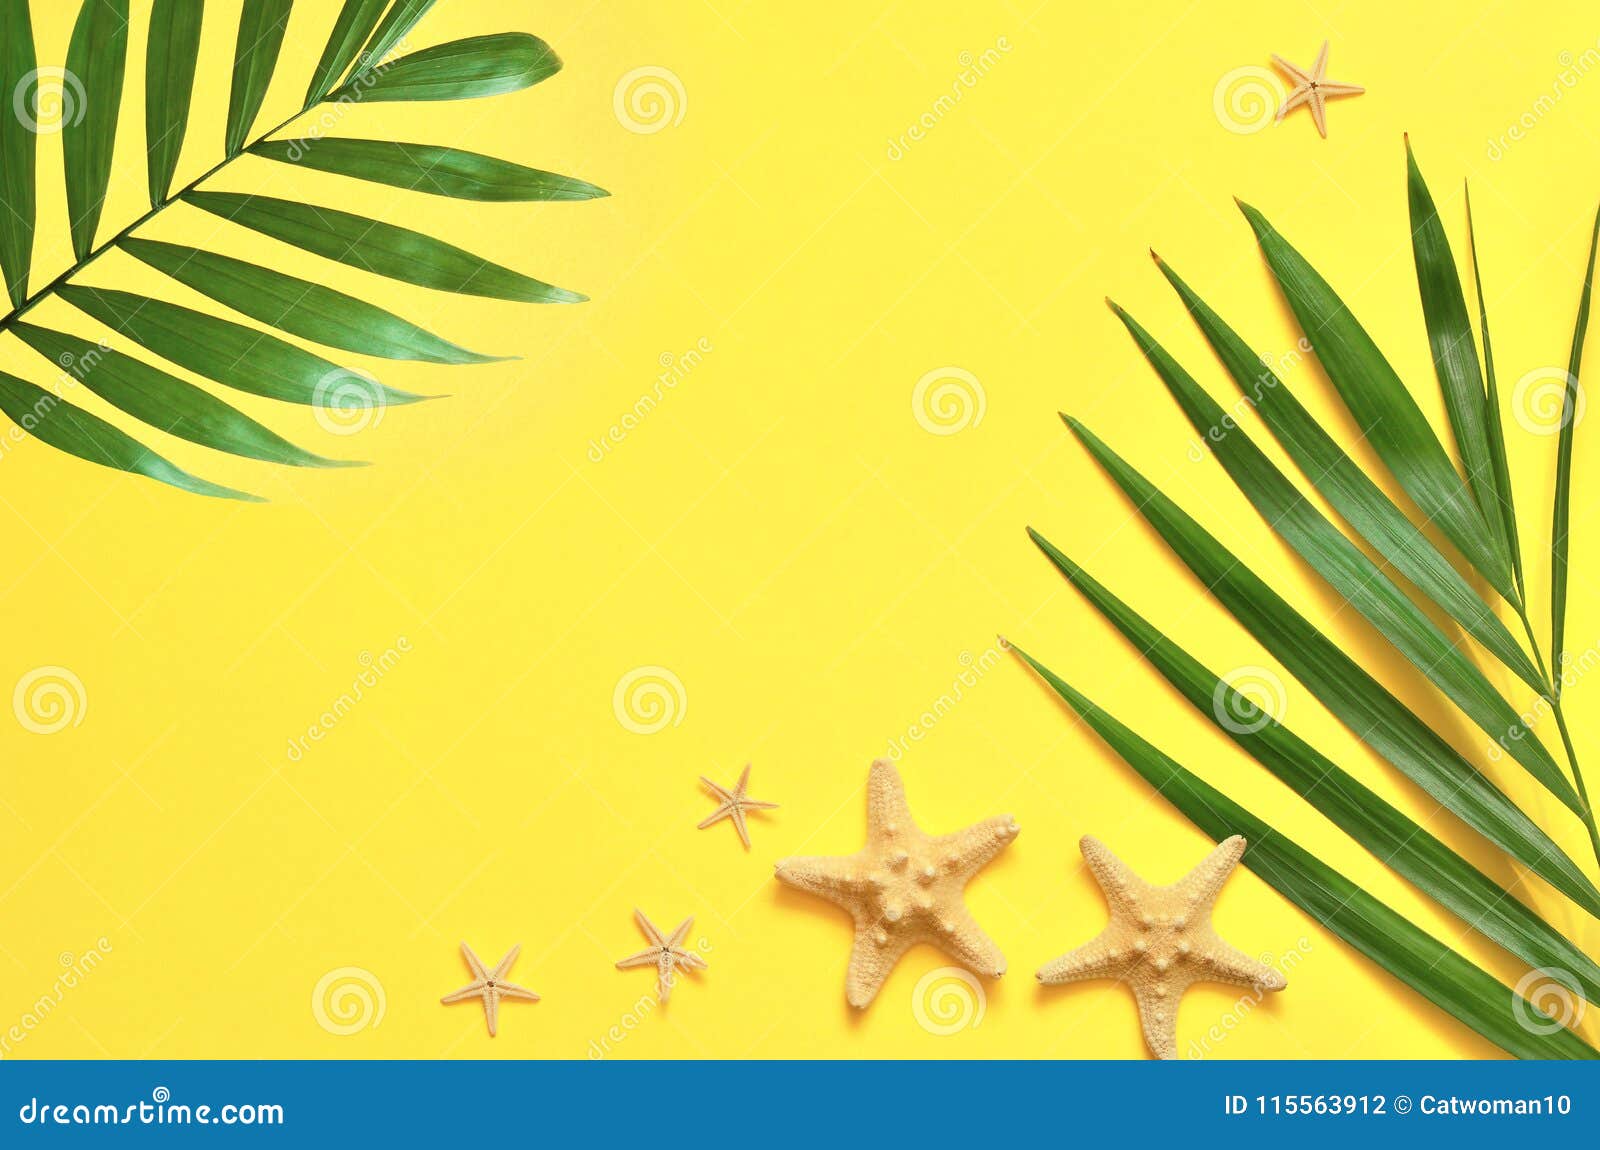 palm trees image with copy space